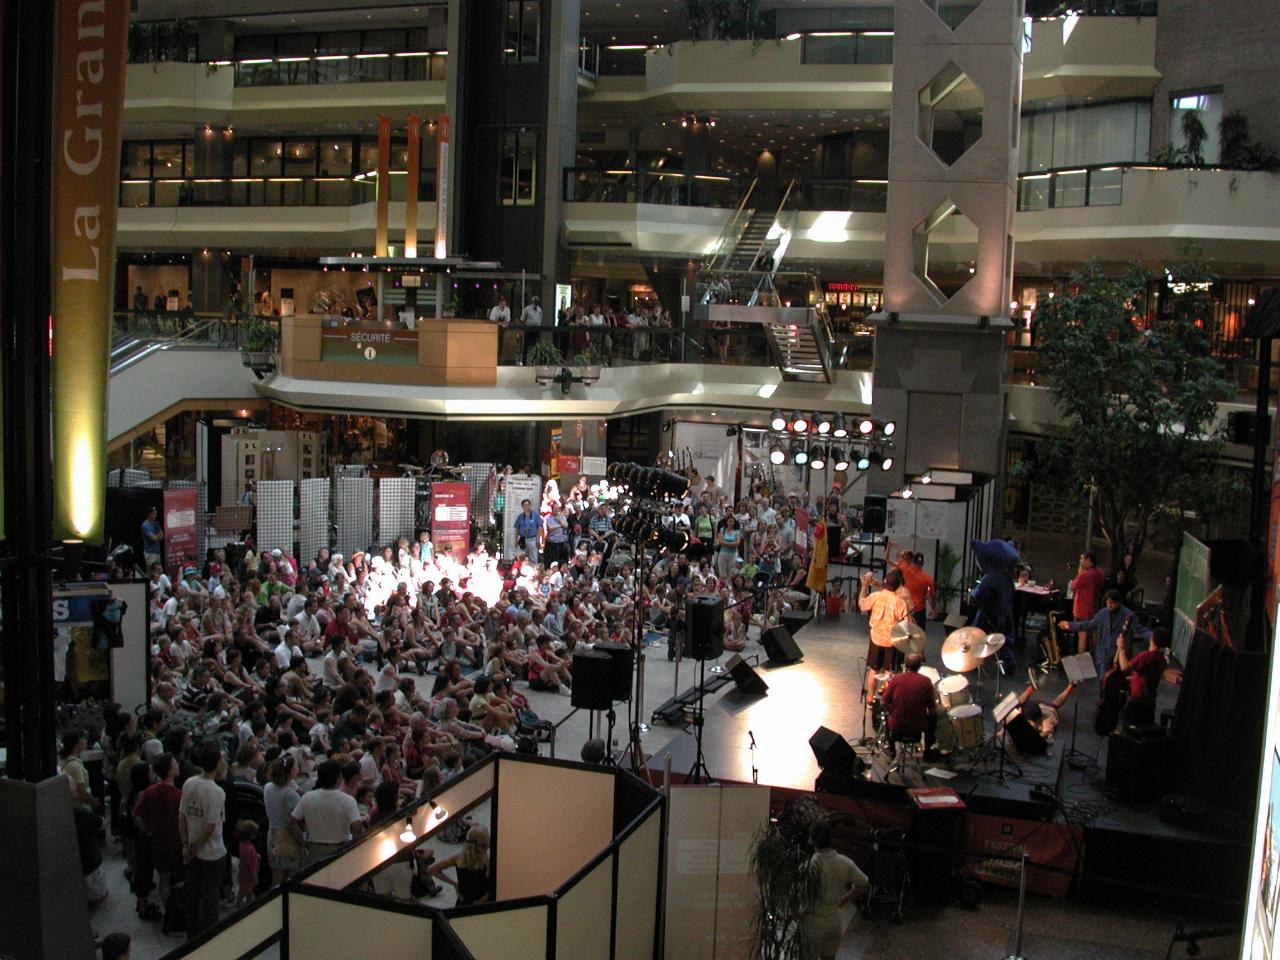 Jazz School for youngsters, in Complexe Desjardins (across from Place des Arts)